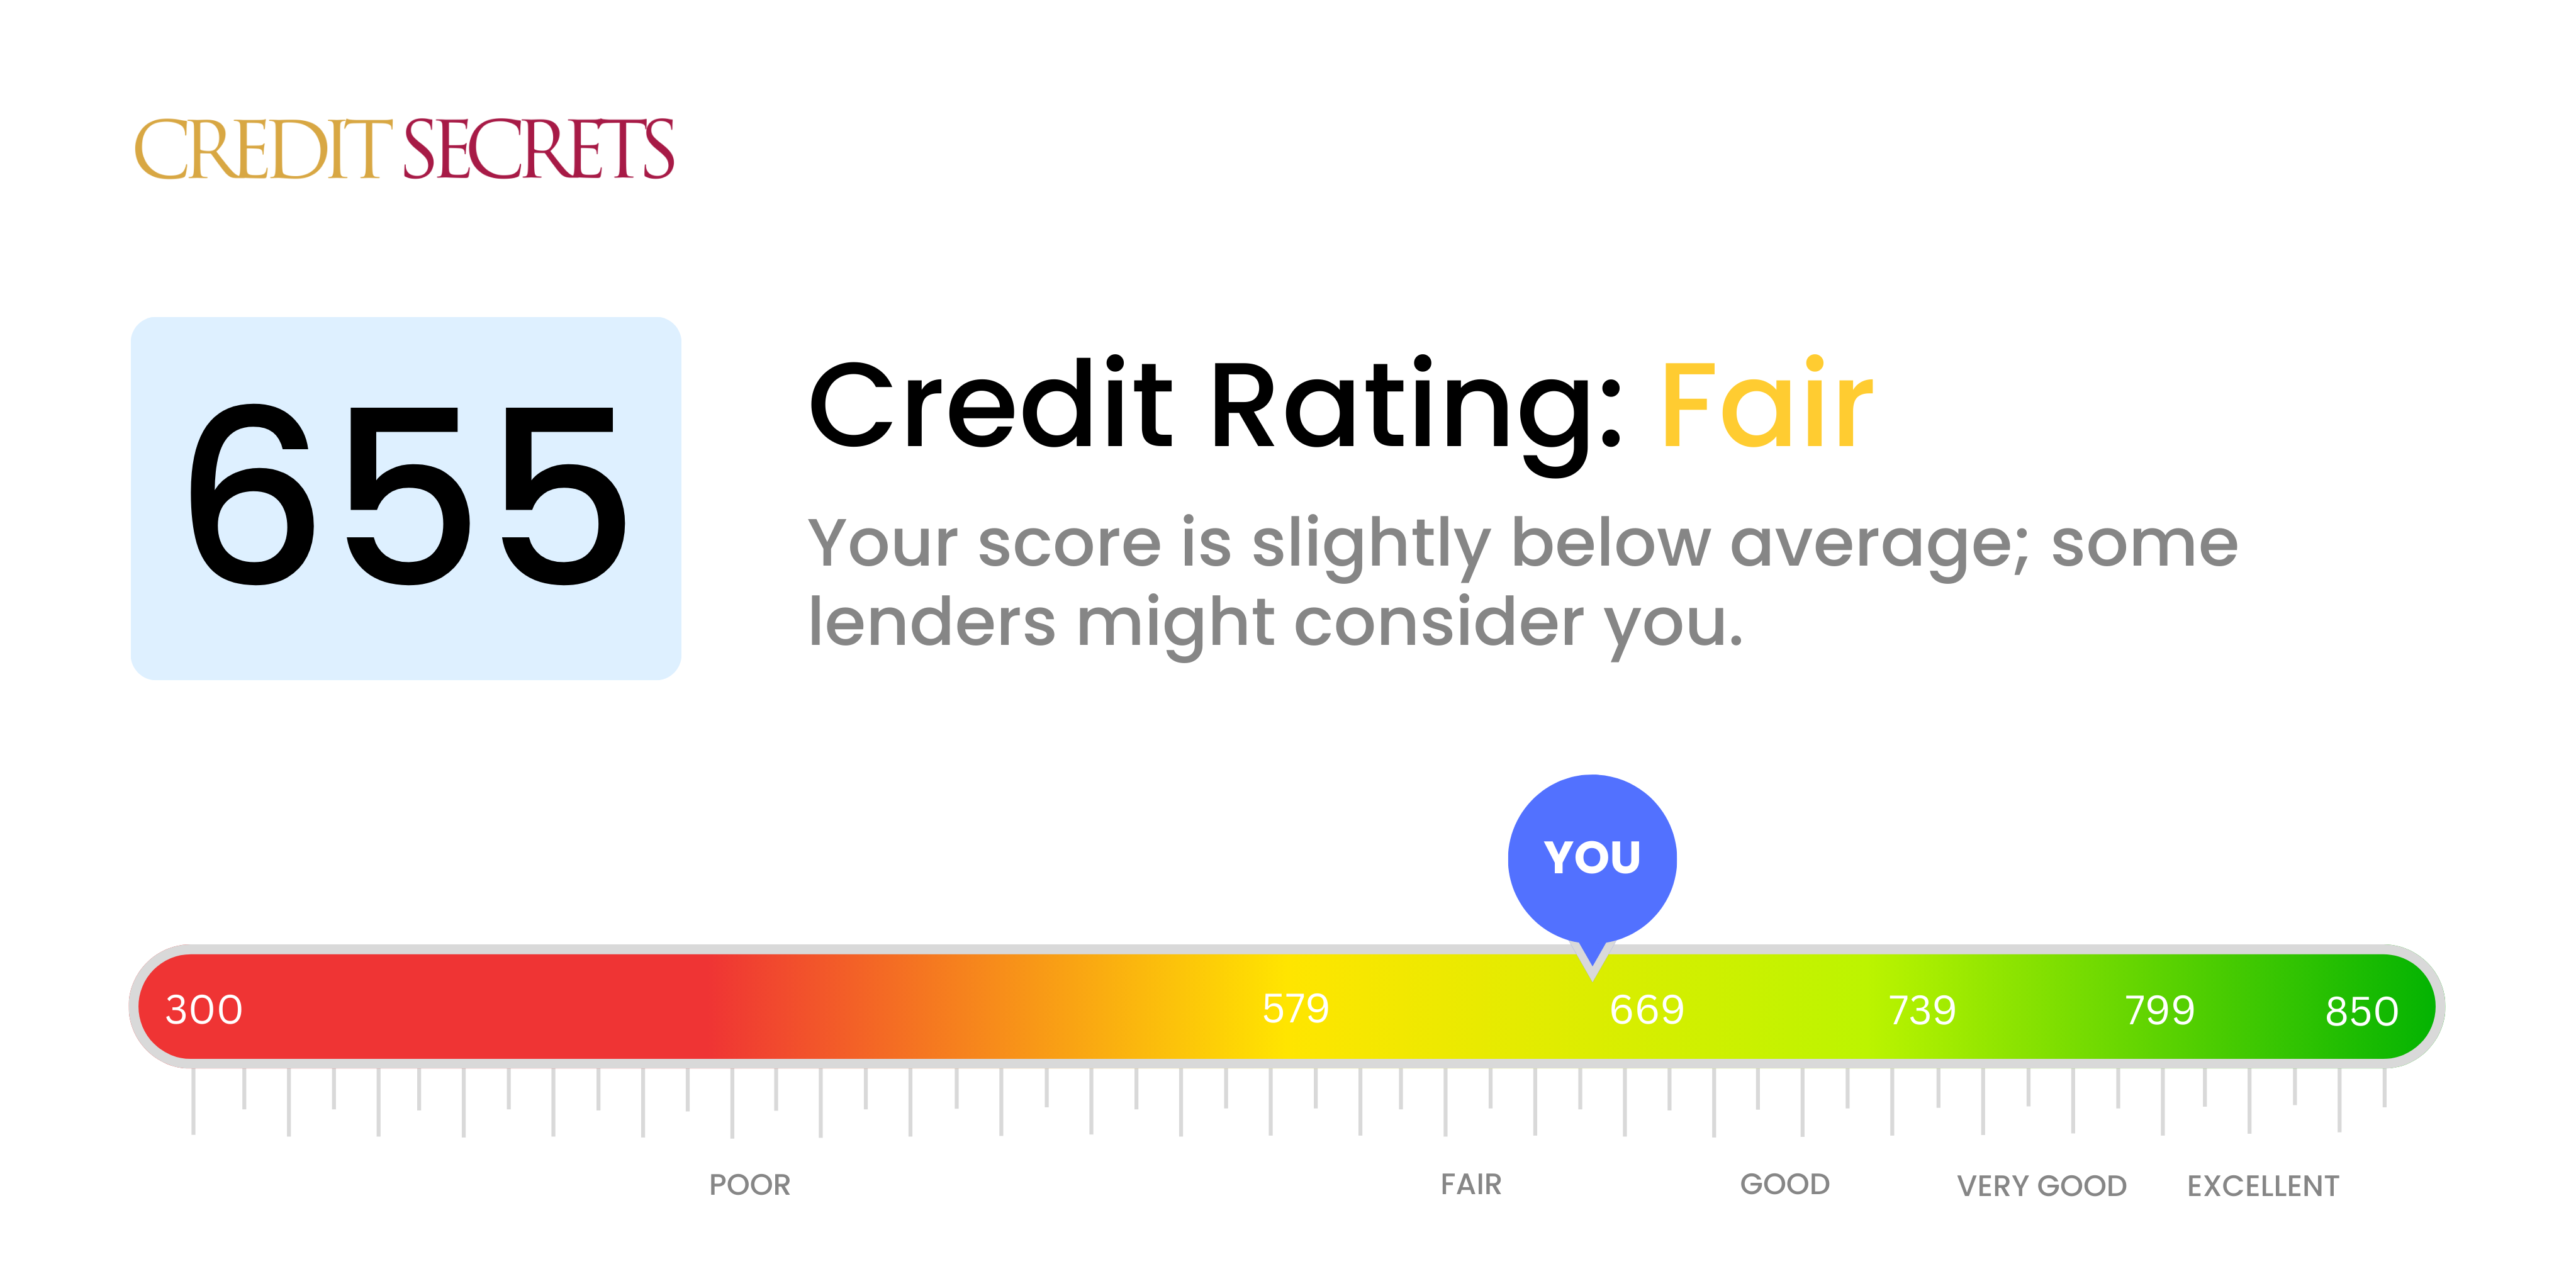 Is 655 a good credit score?